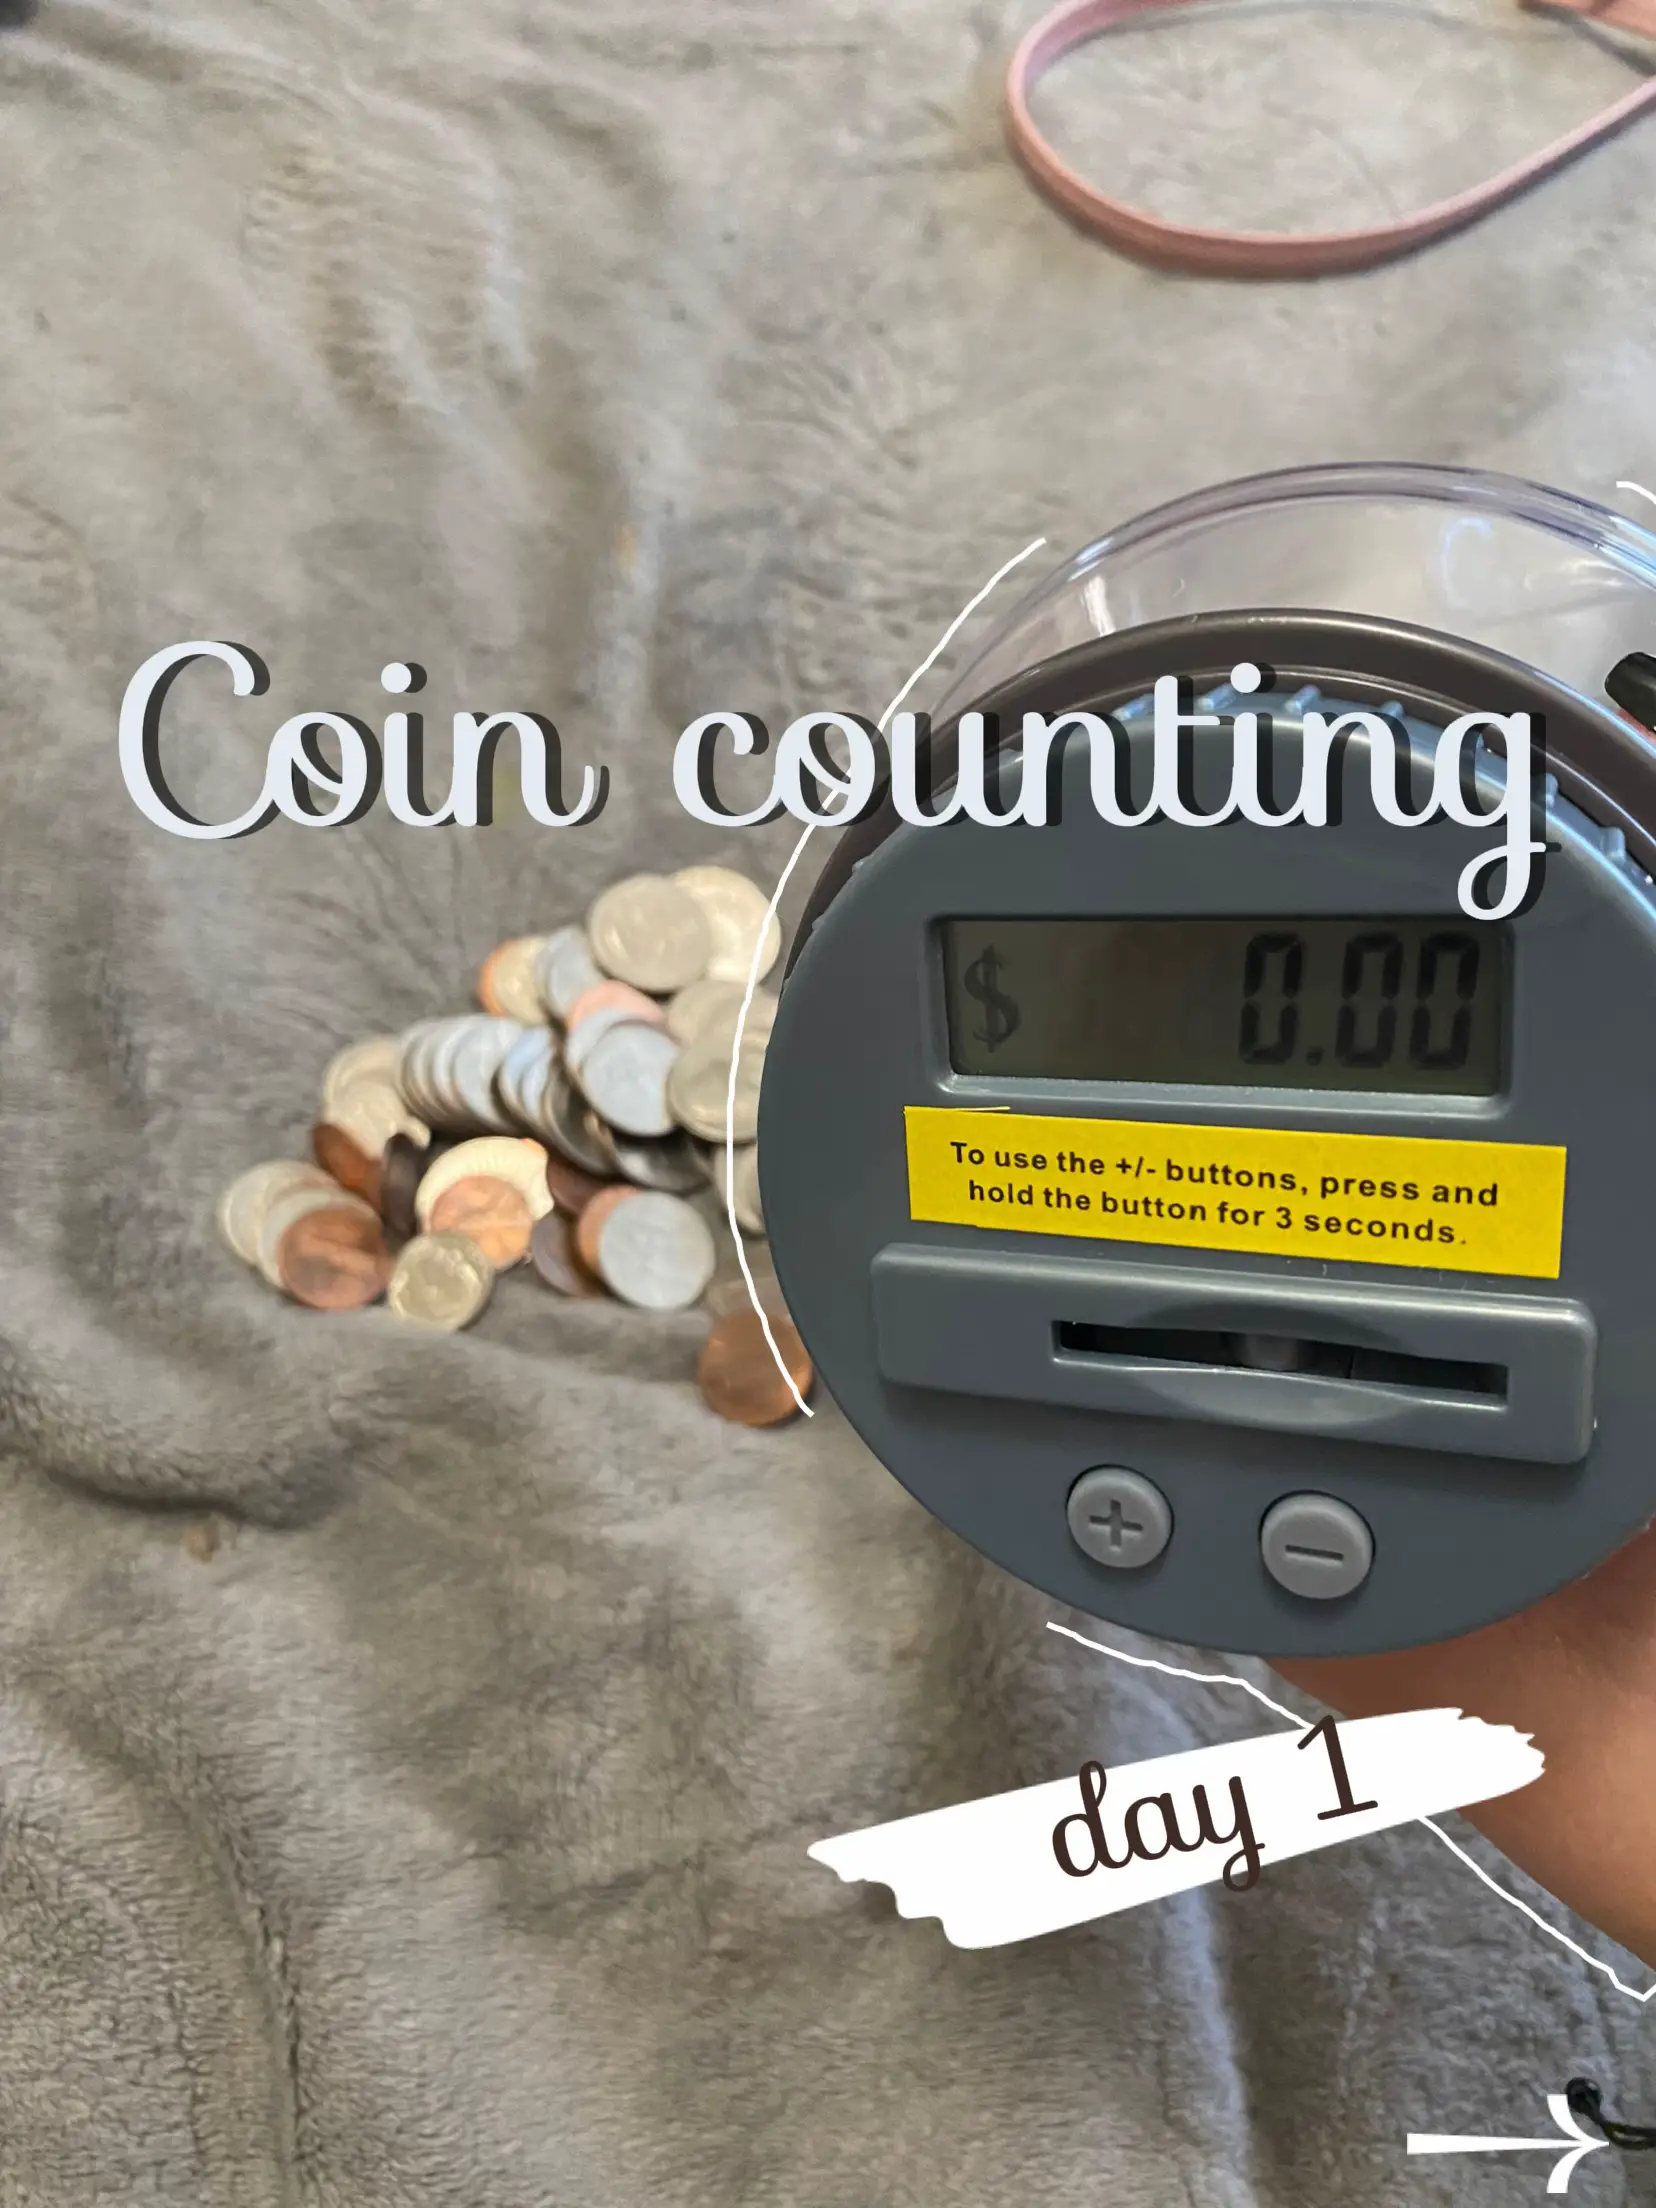 Coin Counting - Lemon8 Search